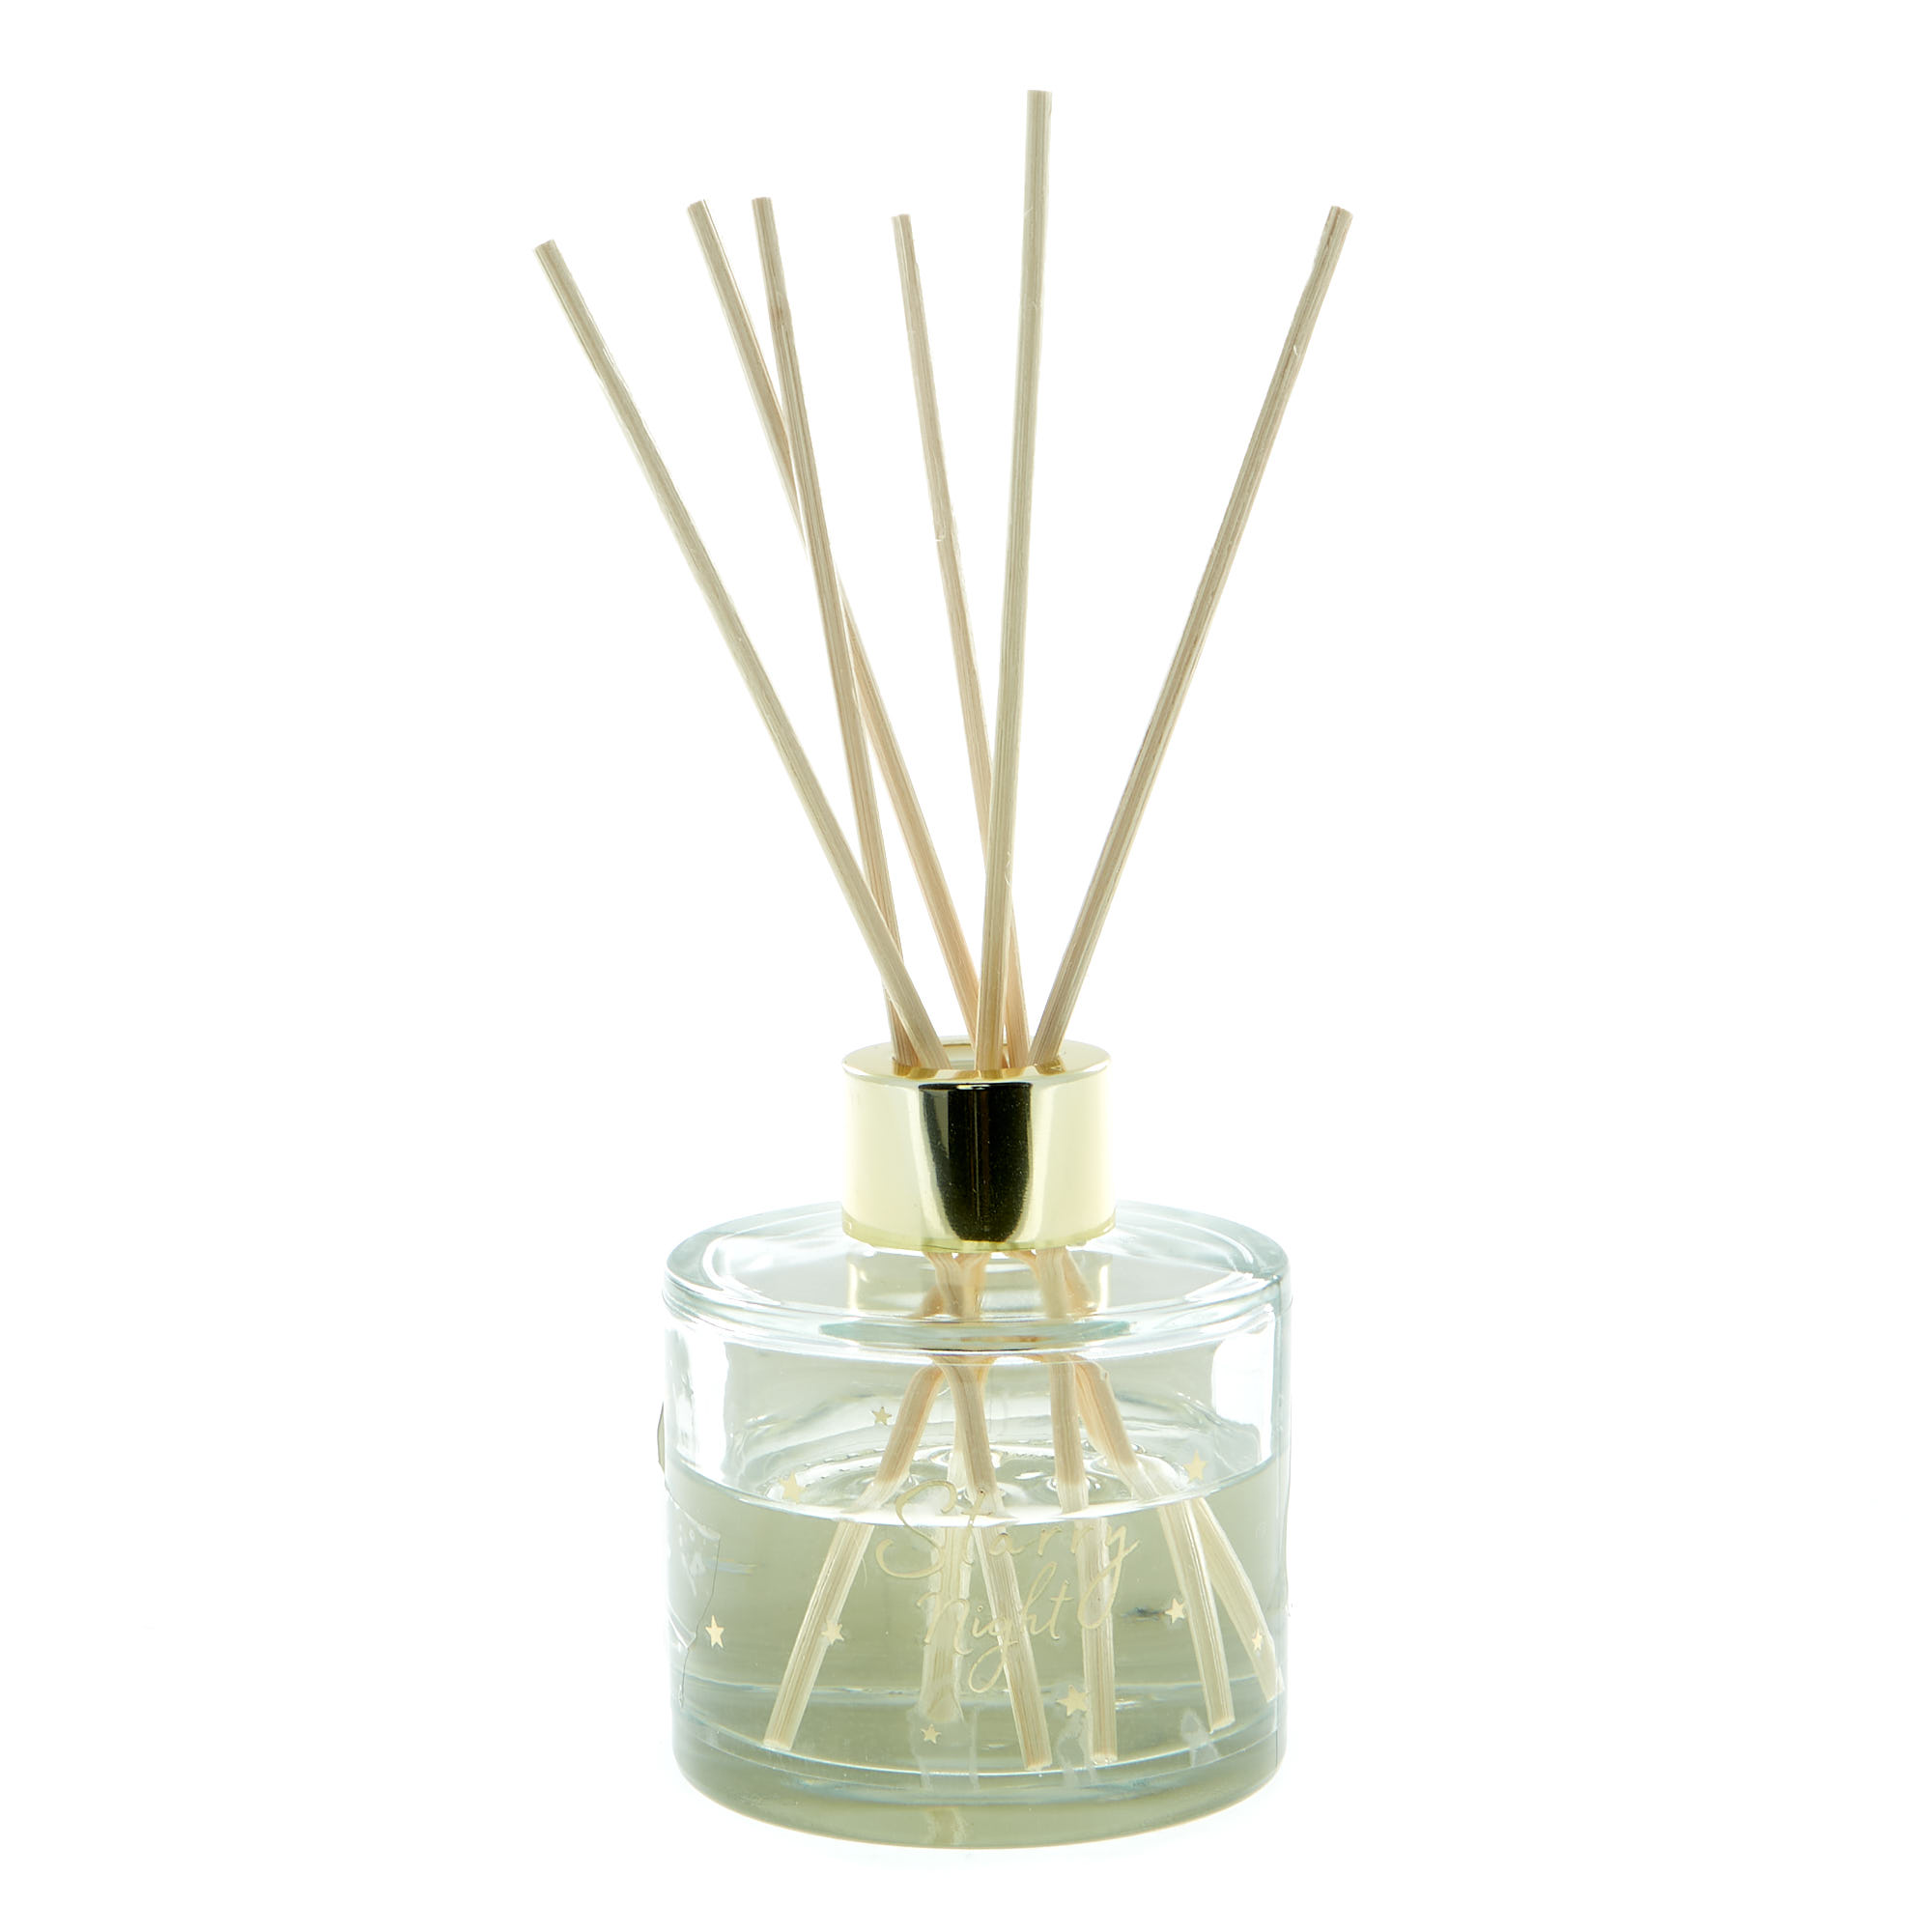 Buy Starry Night Fragrance Diffuser for GBP 3.99 | Card Factory UK